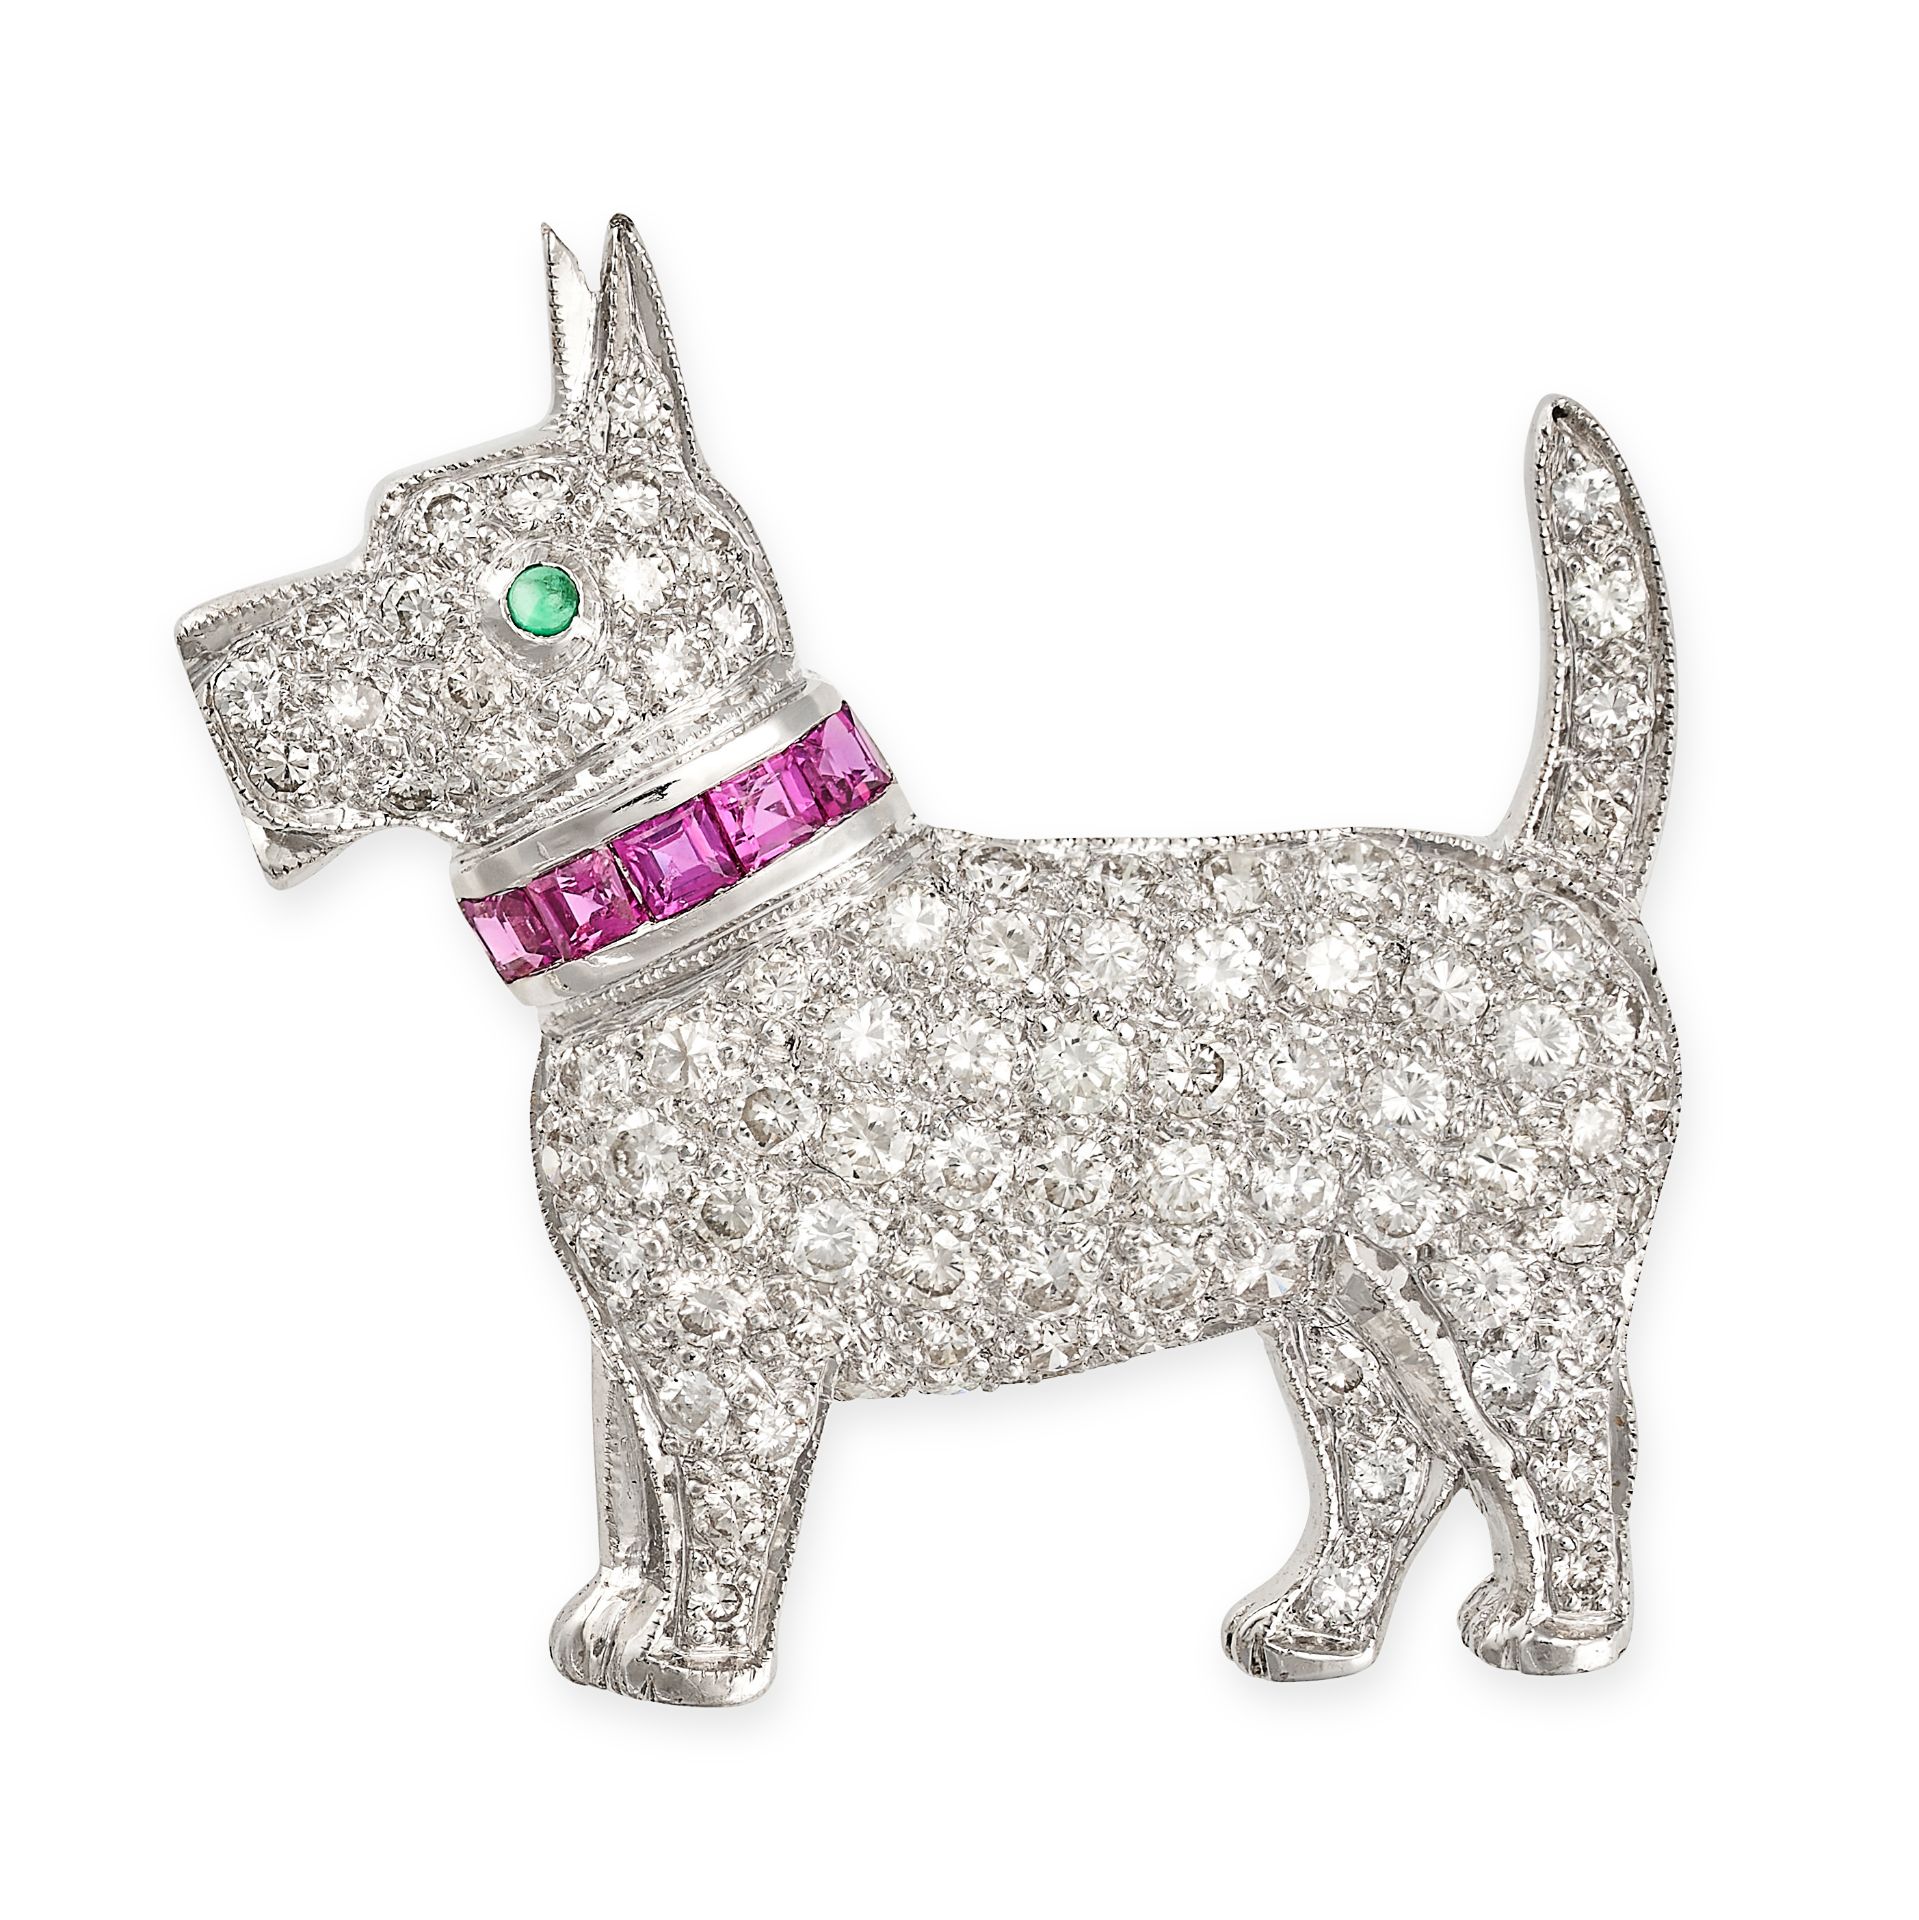 A DIAMOND, RUBY AND EMERALD SCOTTIE DOG BROOCH in white gold, designed as a scottie dog pave set ...